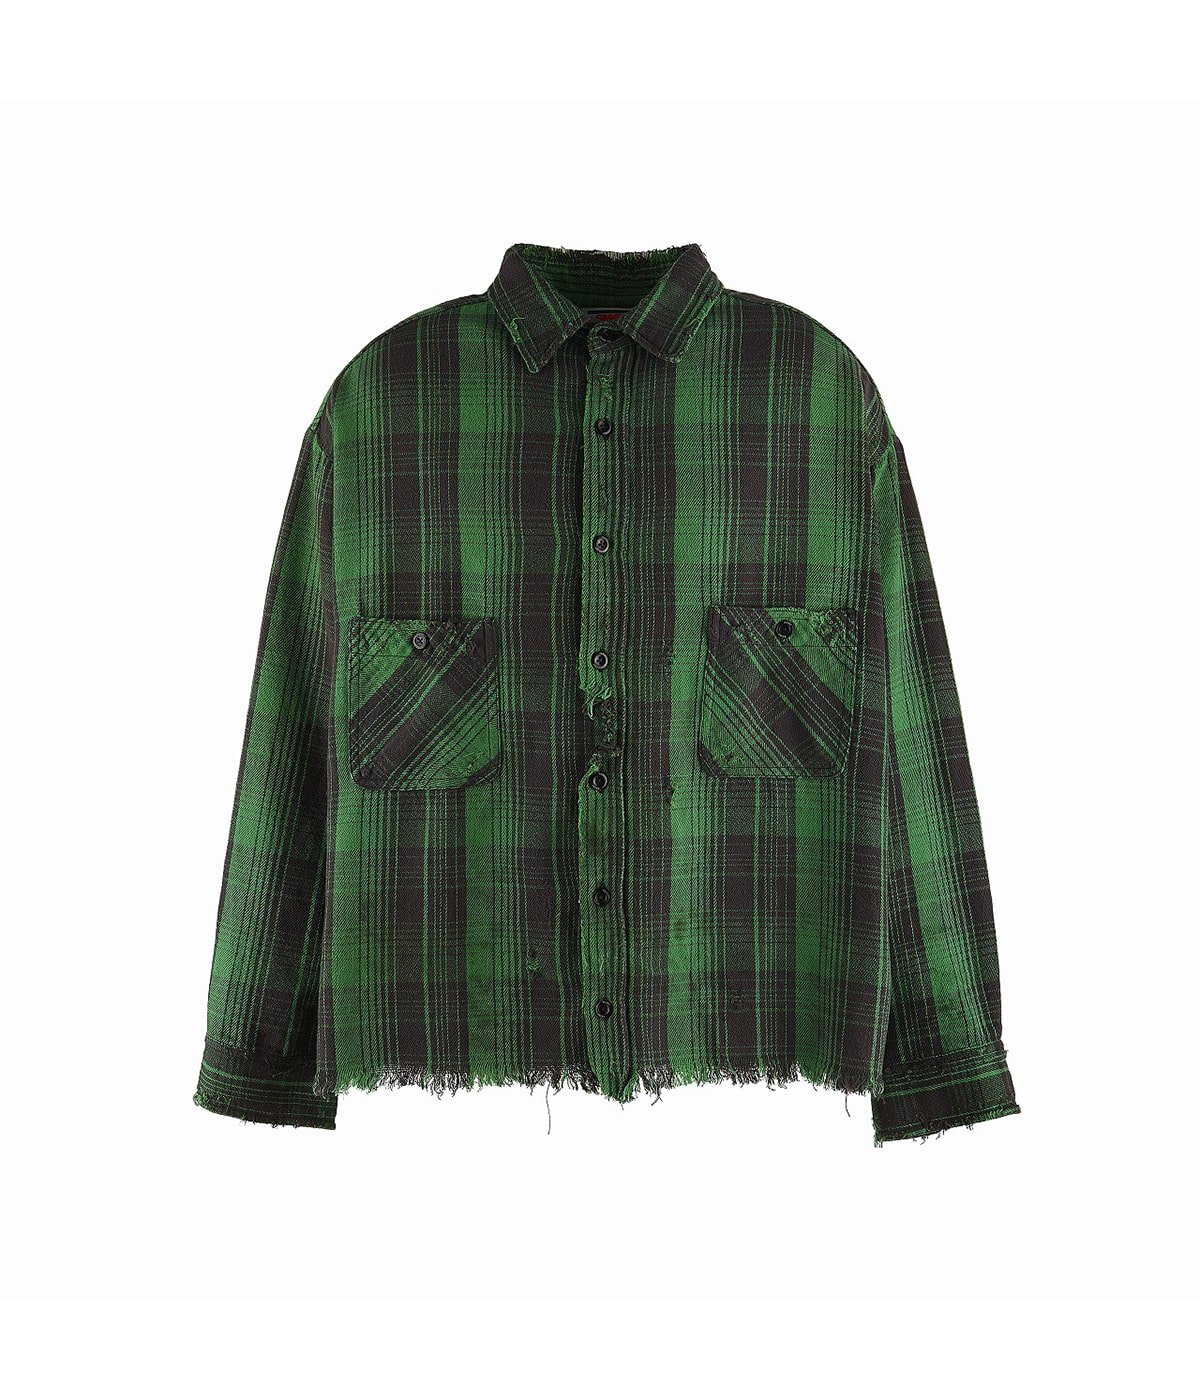 FRNL CHECK SHIRTS | SAINT Mxxxxxx(セント マイケル) / トップス 長袖 